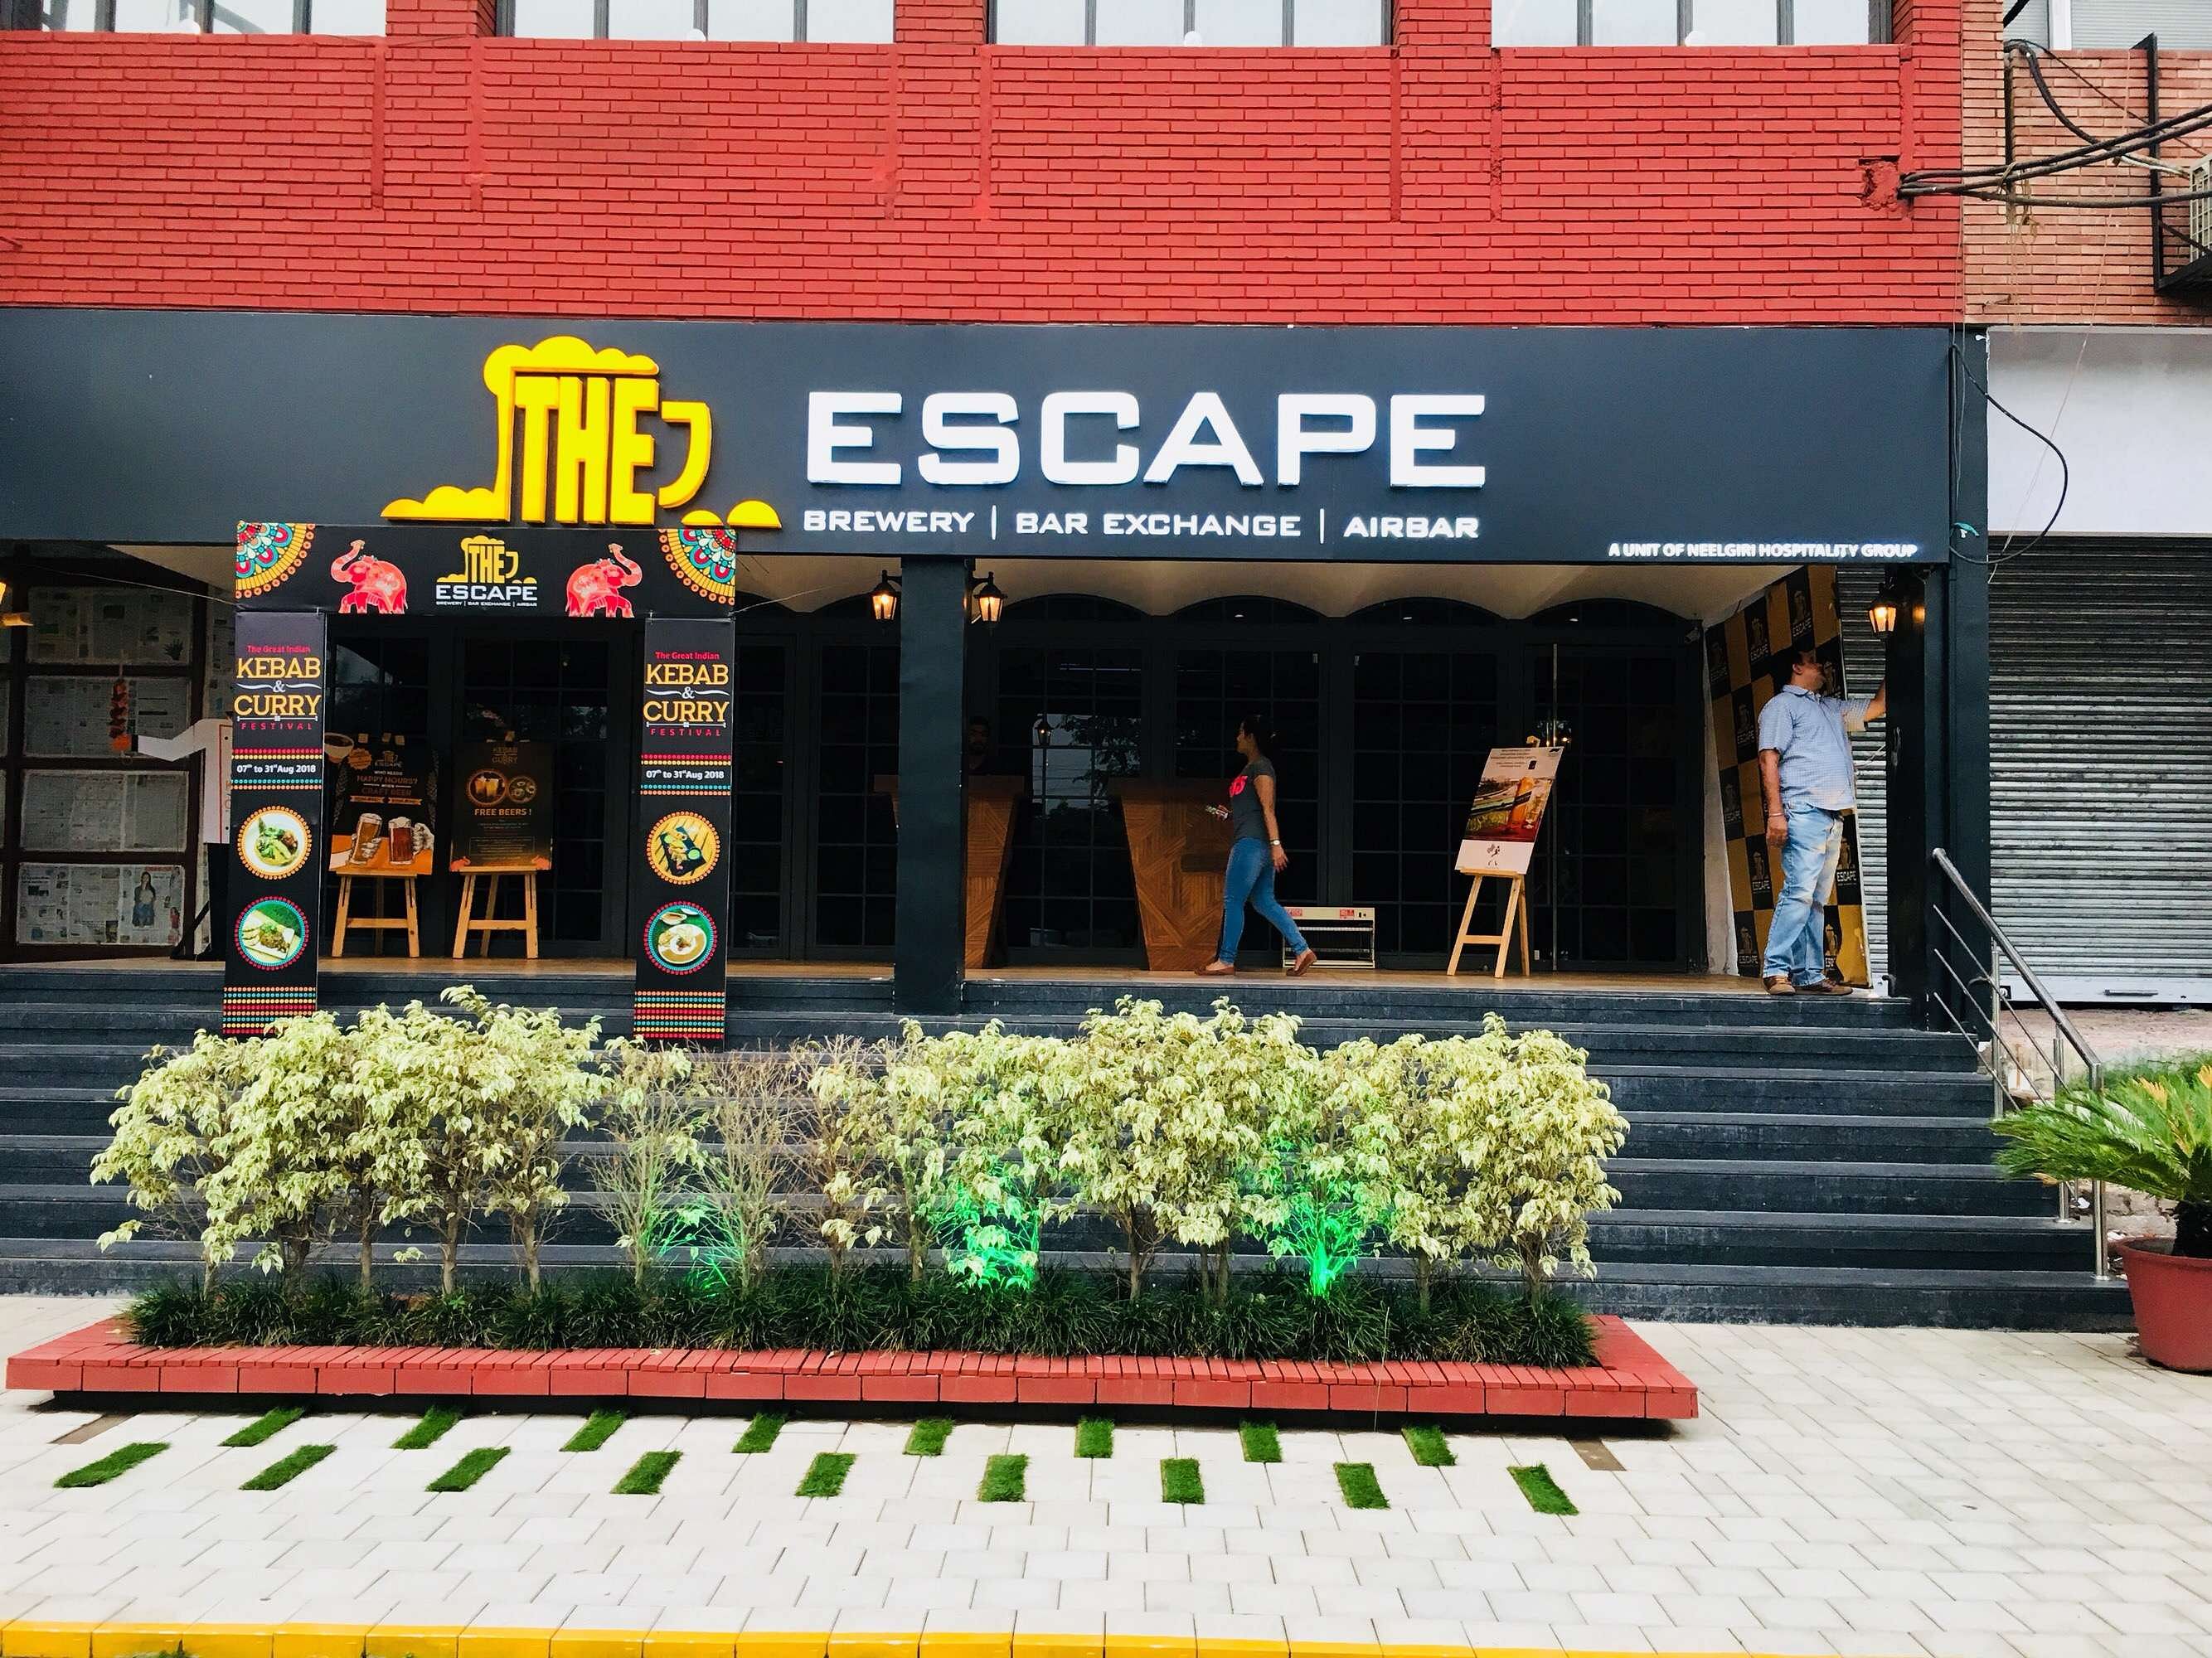 The Escape in Sector 5 Panchkula, Chandigarh